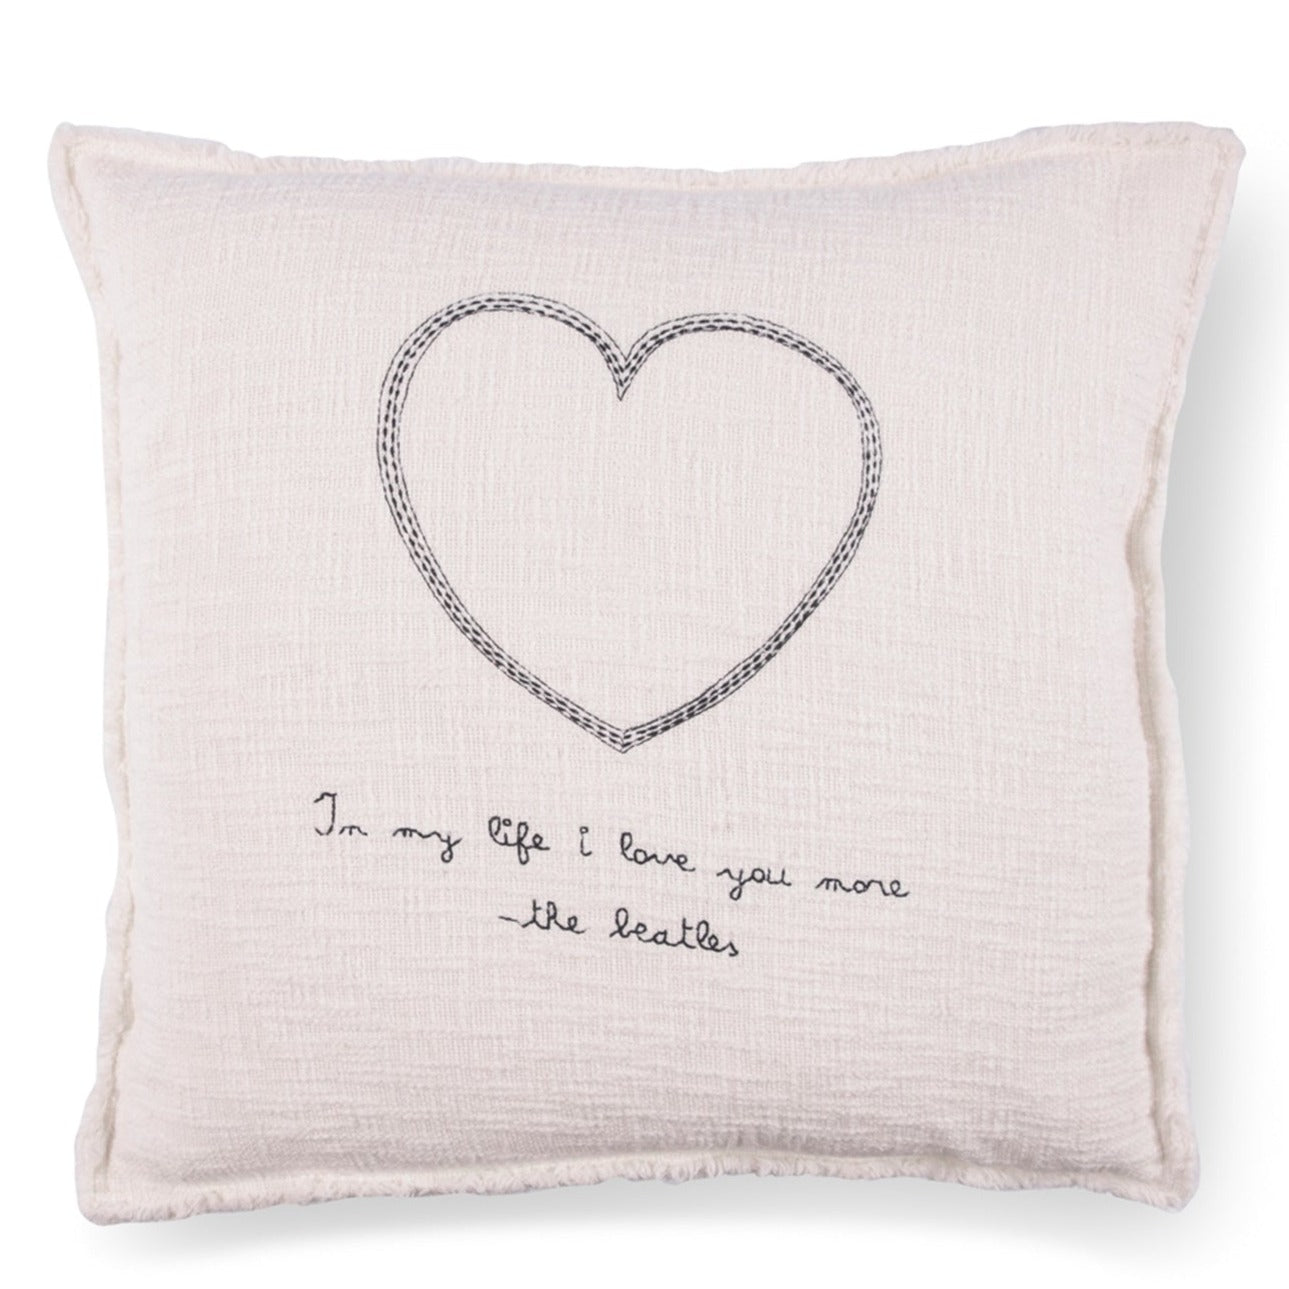 Sugarboo Designs In My Life The Beatles Embroidered Pillow